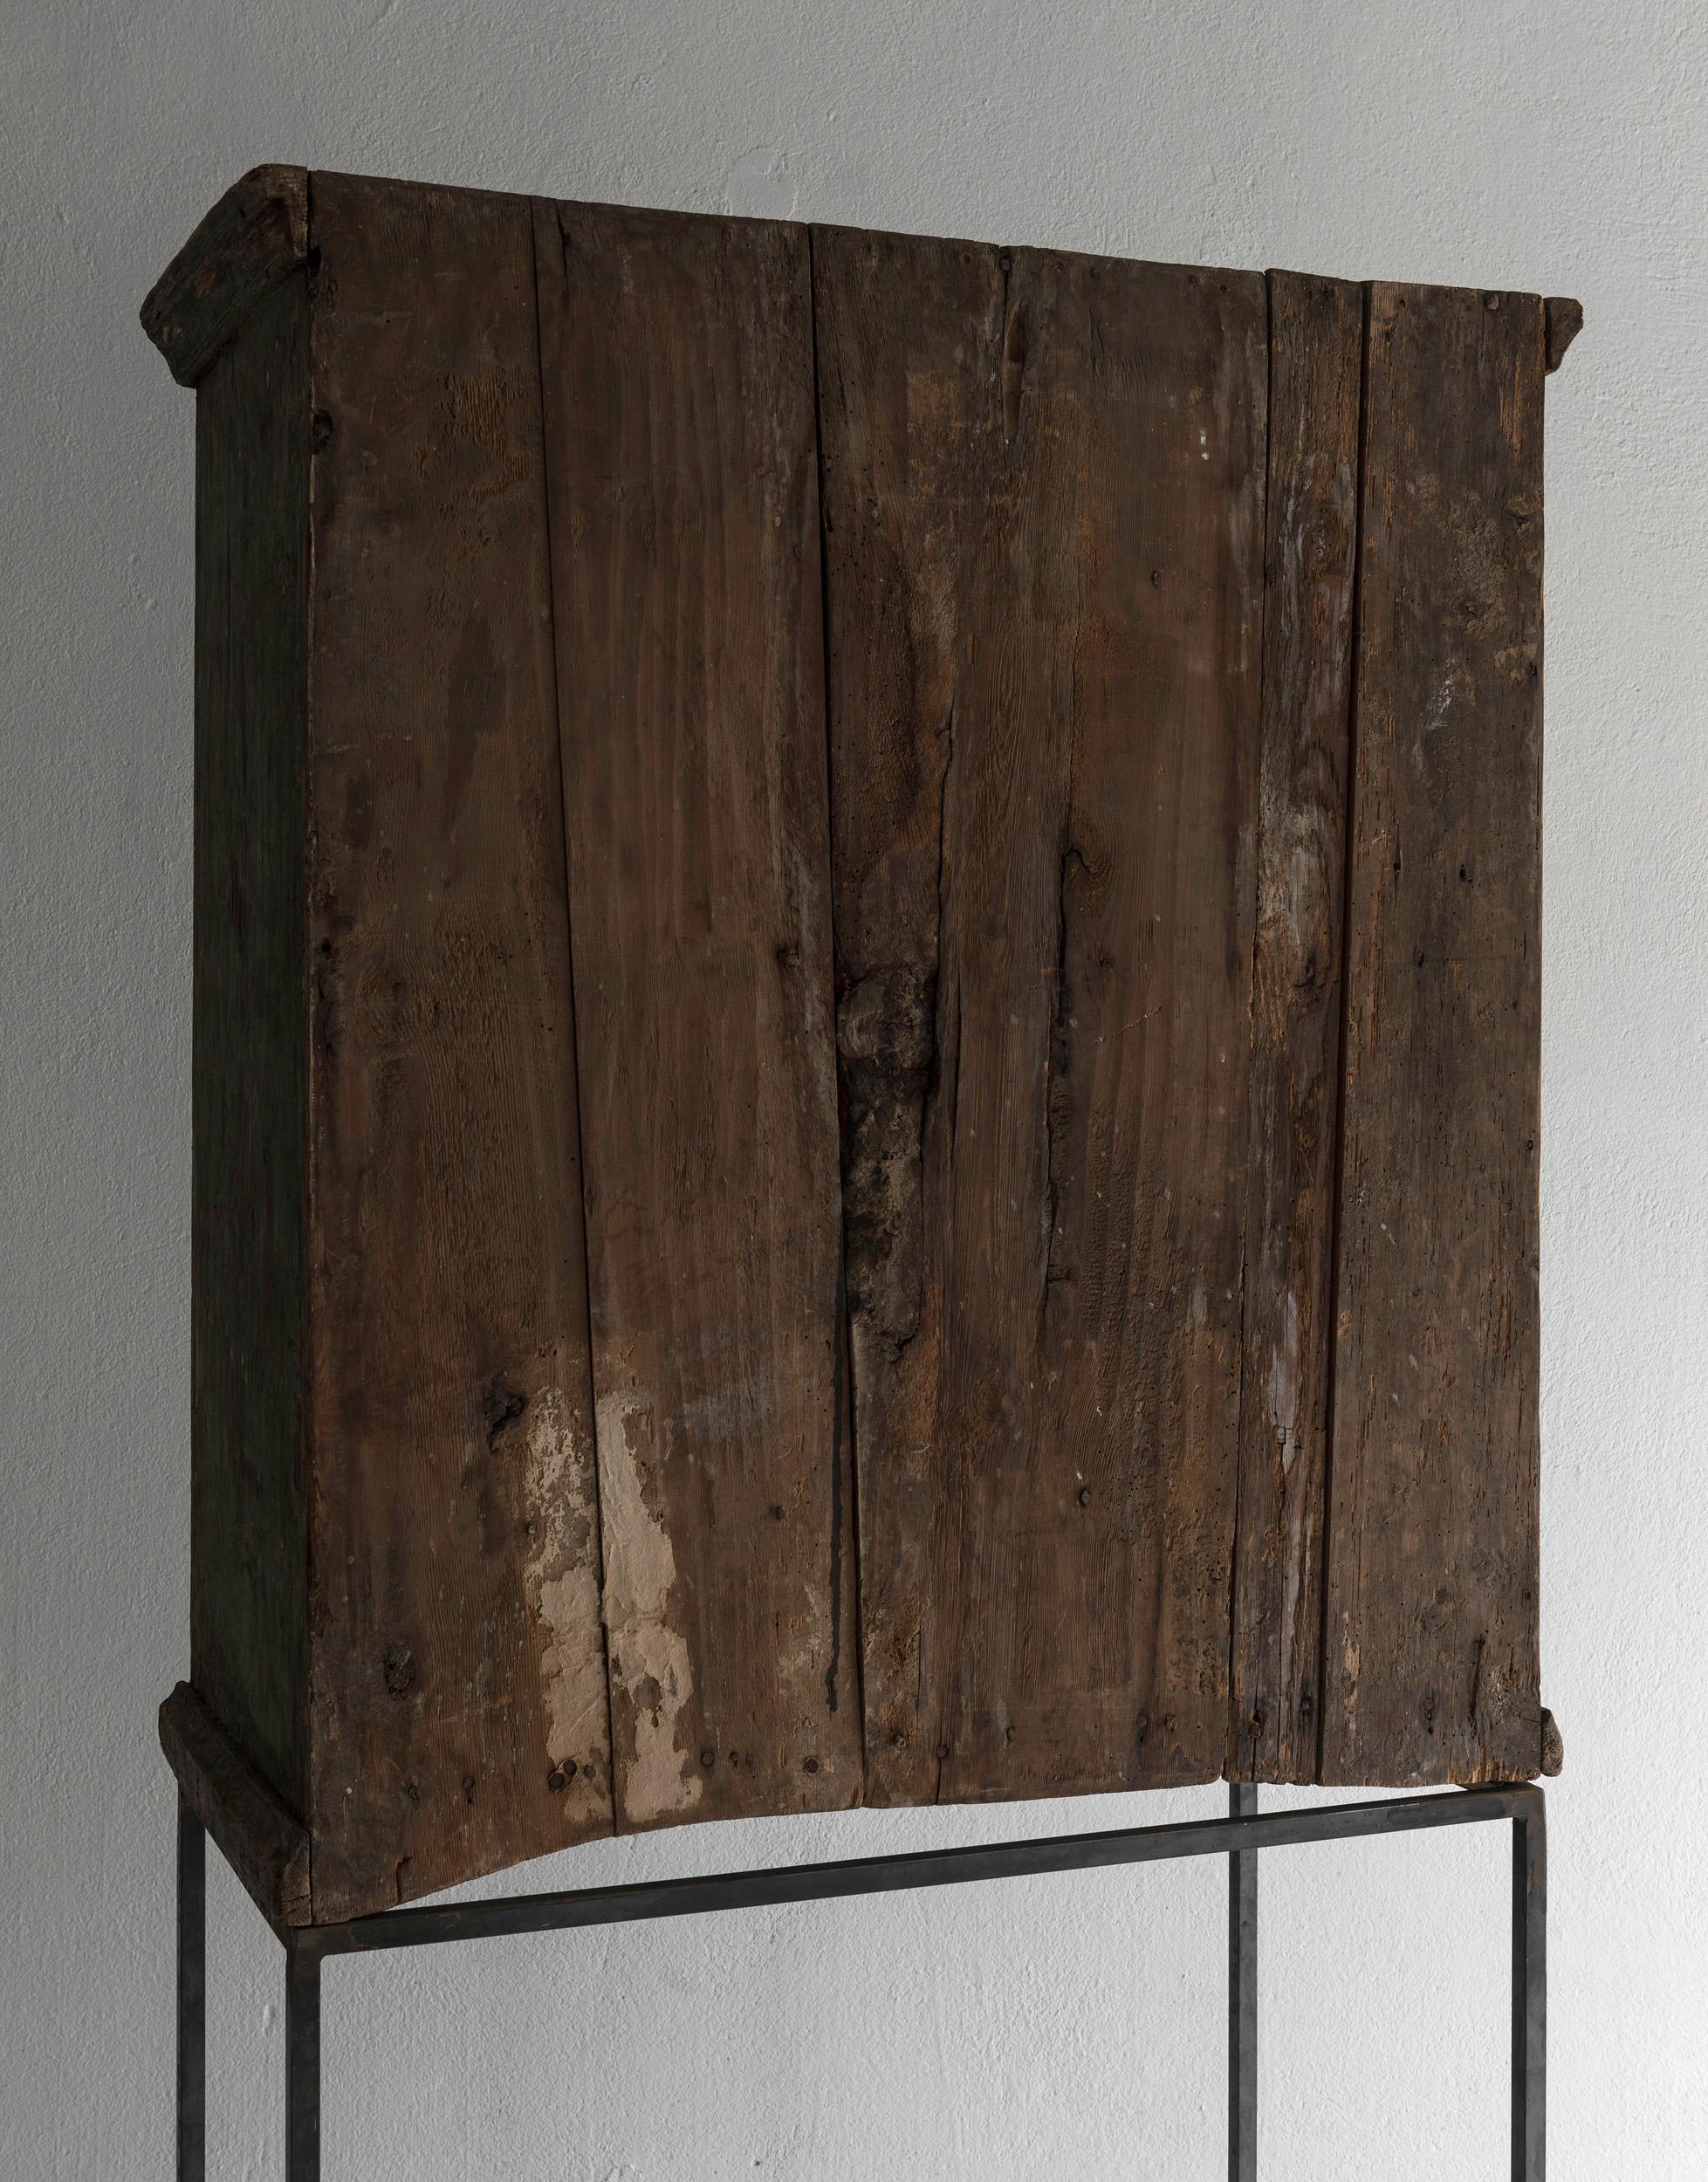 Outstanding Original 18th Century Cabinet on Modern Steel Stand 2